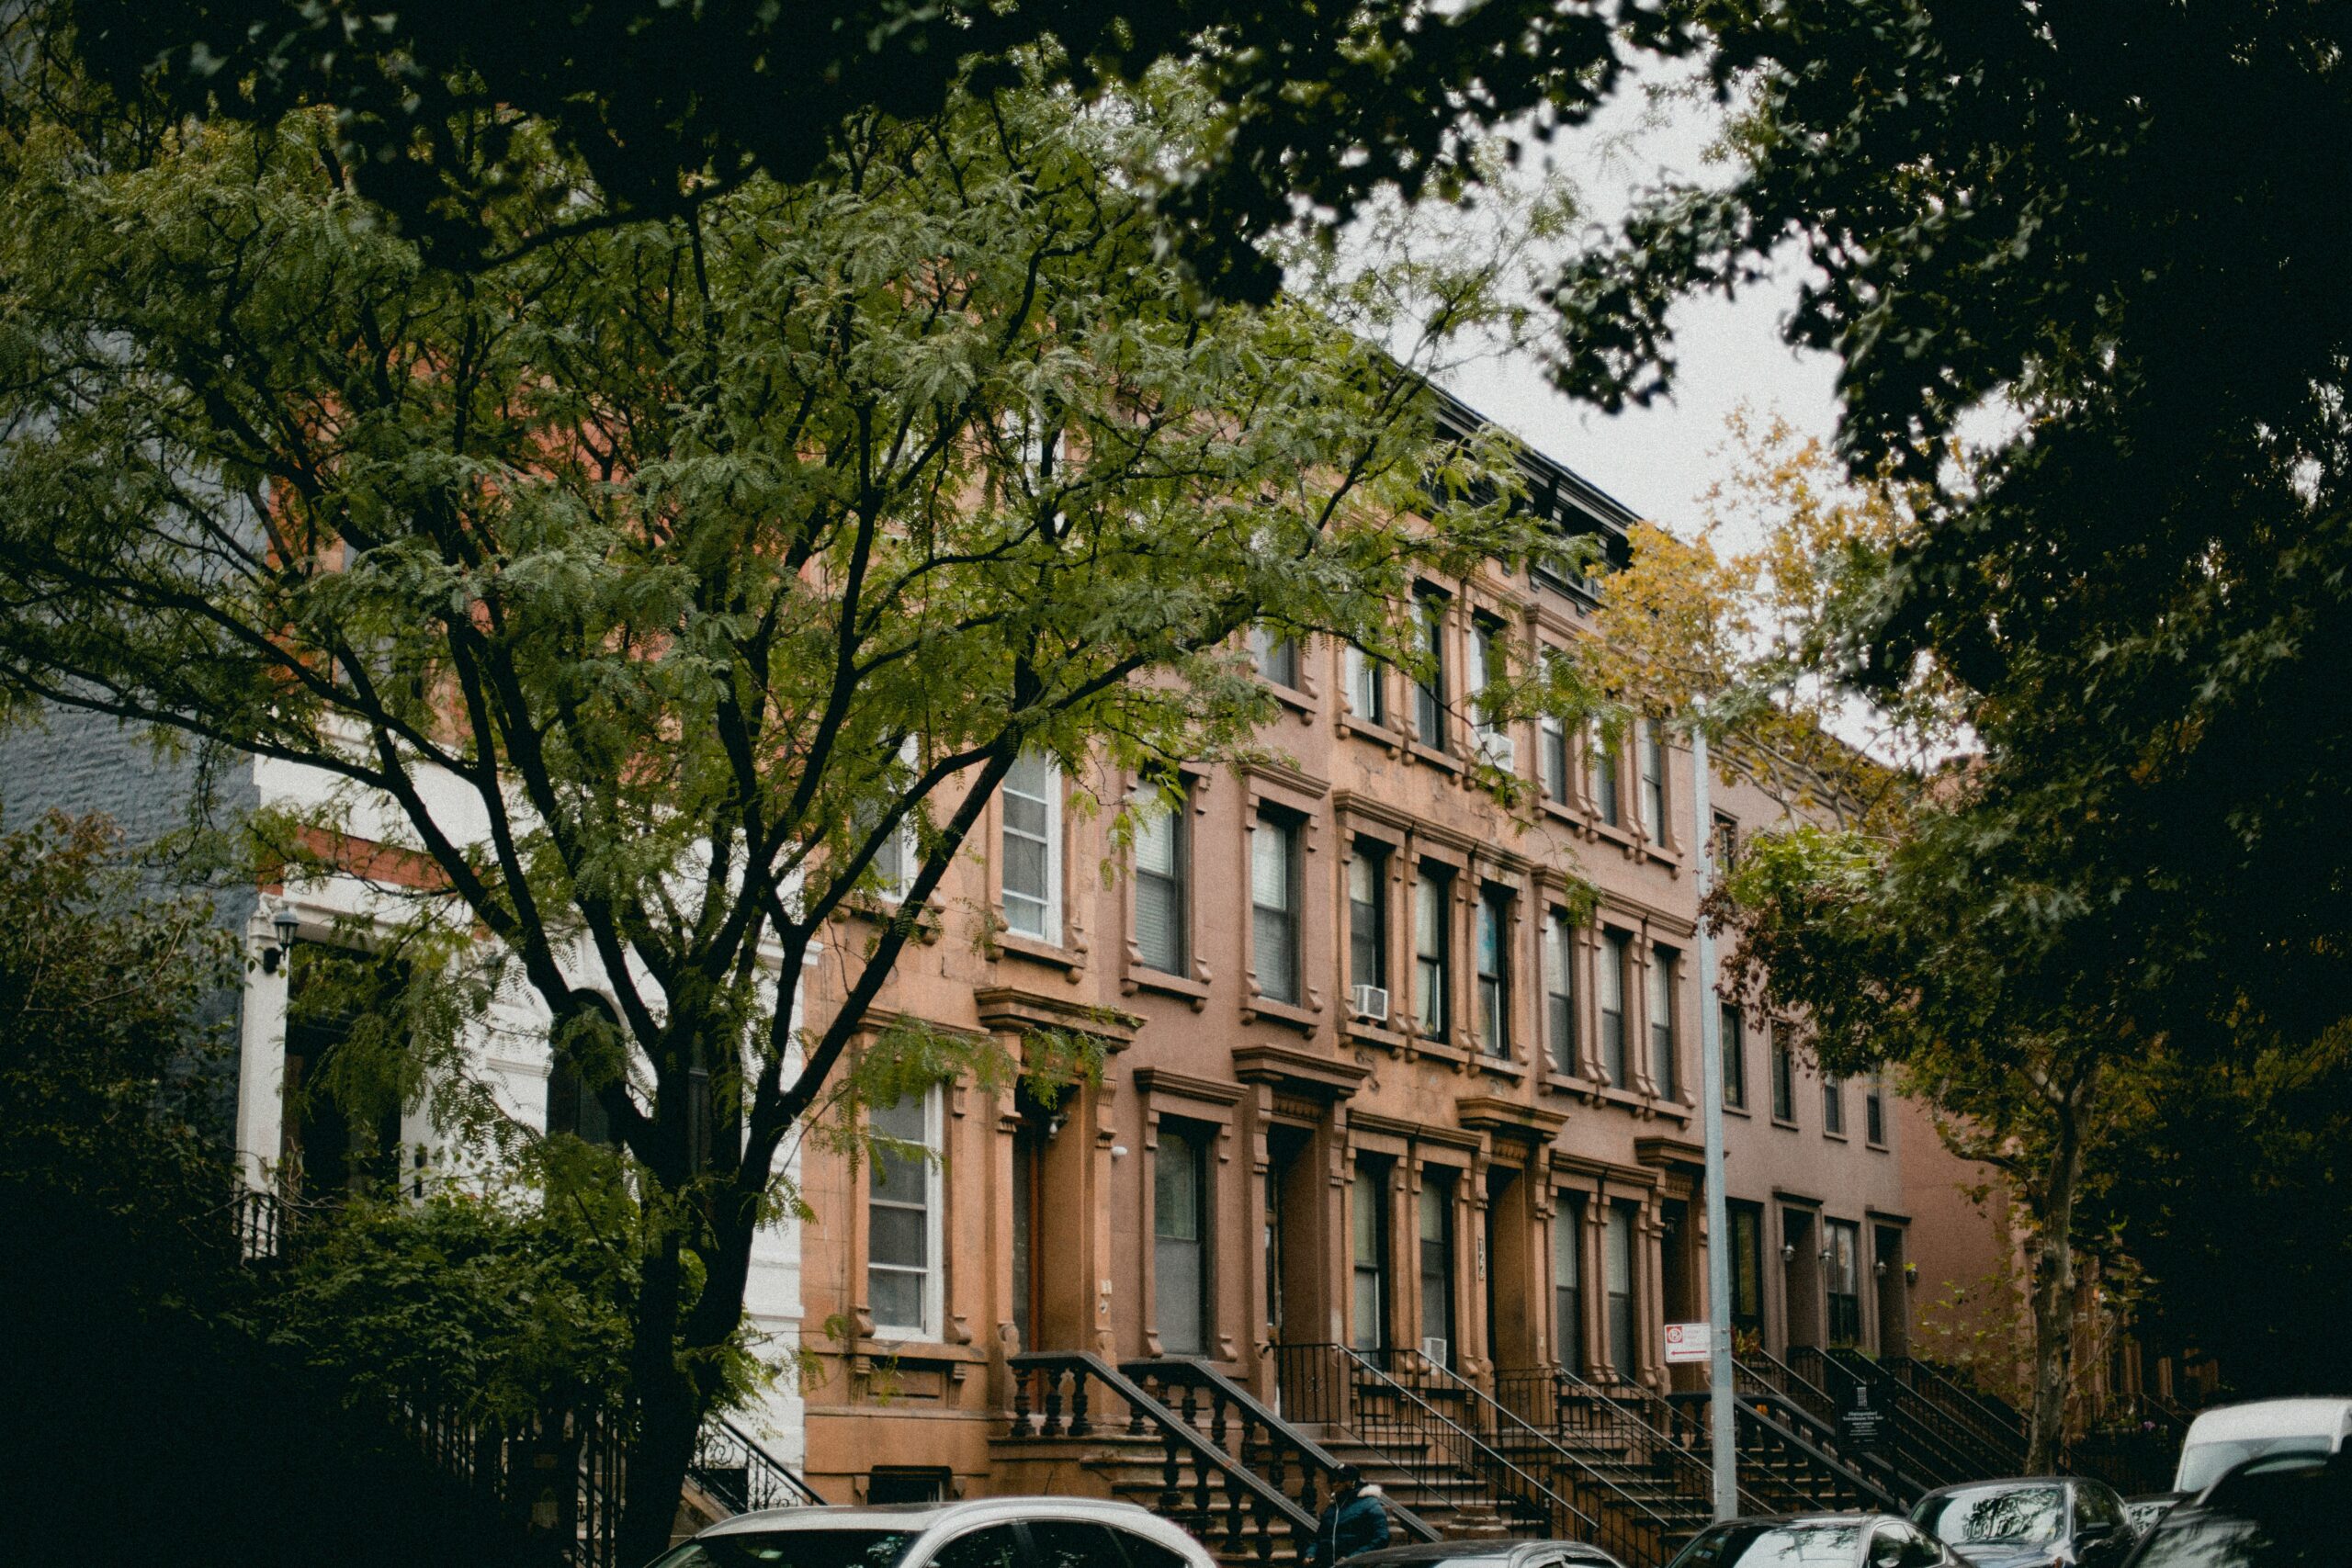 Harlem is a popular destination of New York, which has a complex past. Check out the safest areas for tourists.
pictured: the brownstones of west Harlem surrounded by big green trees